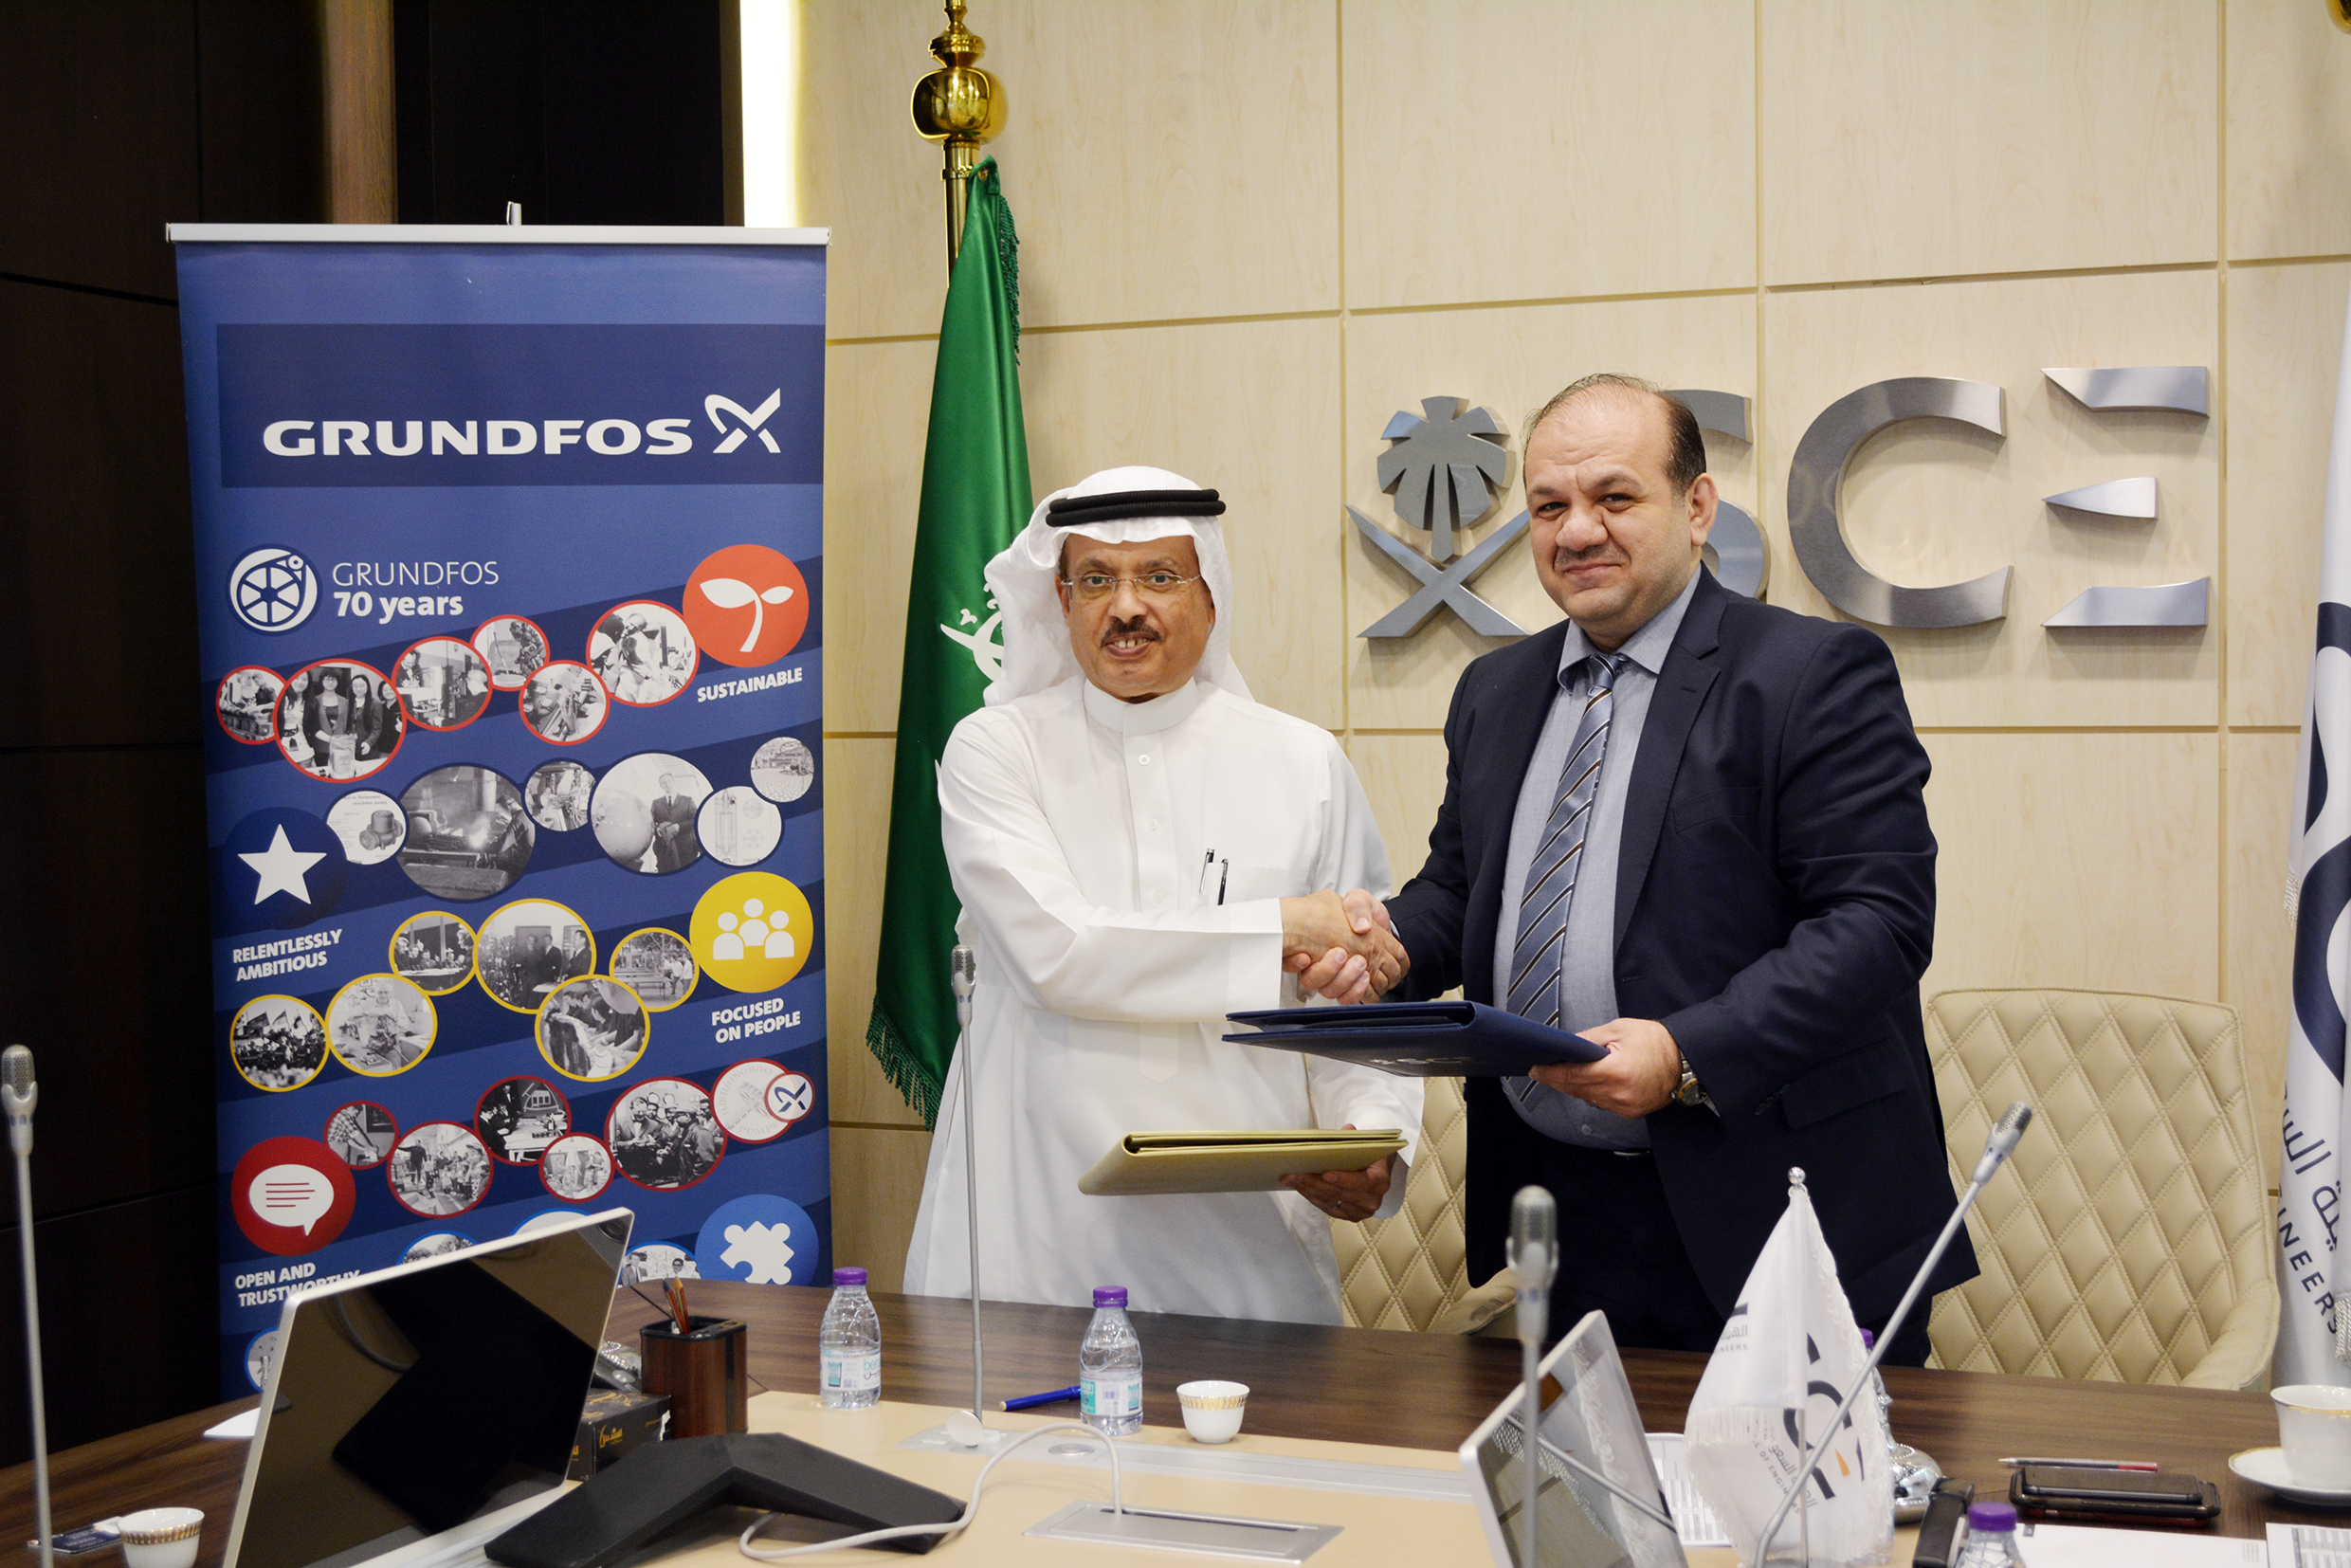 The MoU was signed by Eng Sulaiman I Al-Amoud, secretary general of SCE and Abdulaziz Daghestani, deputy general manager of Grundfos Saudi Arabia.